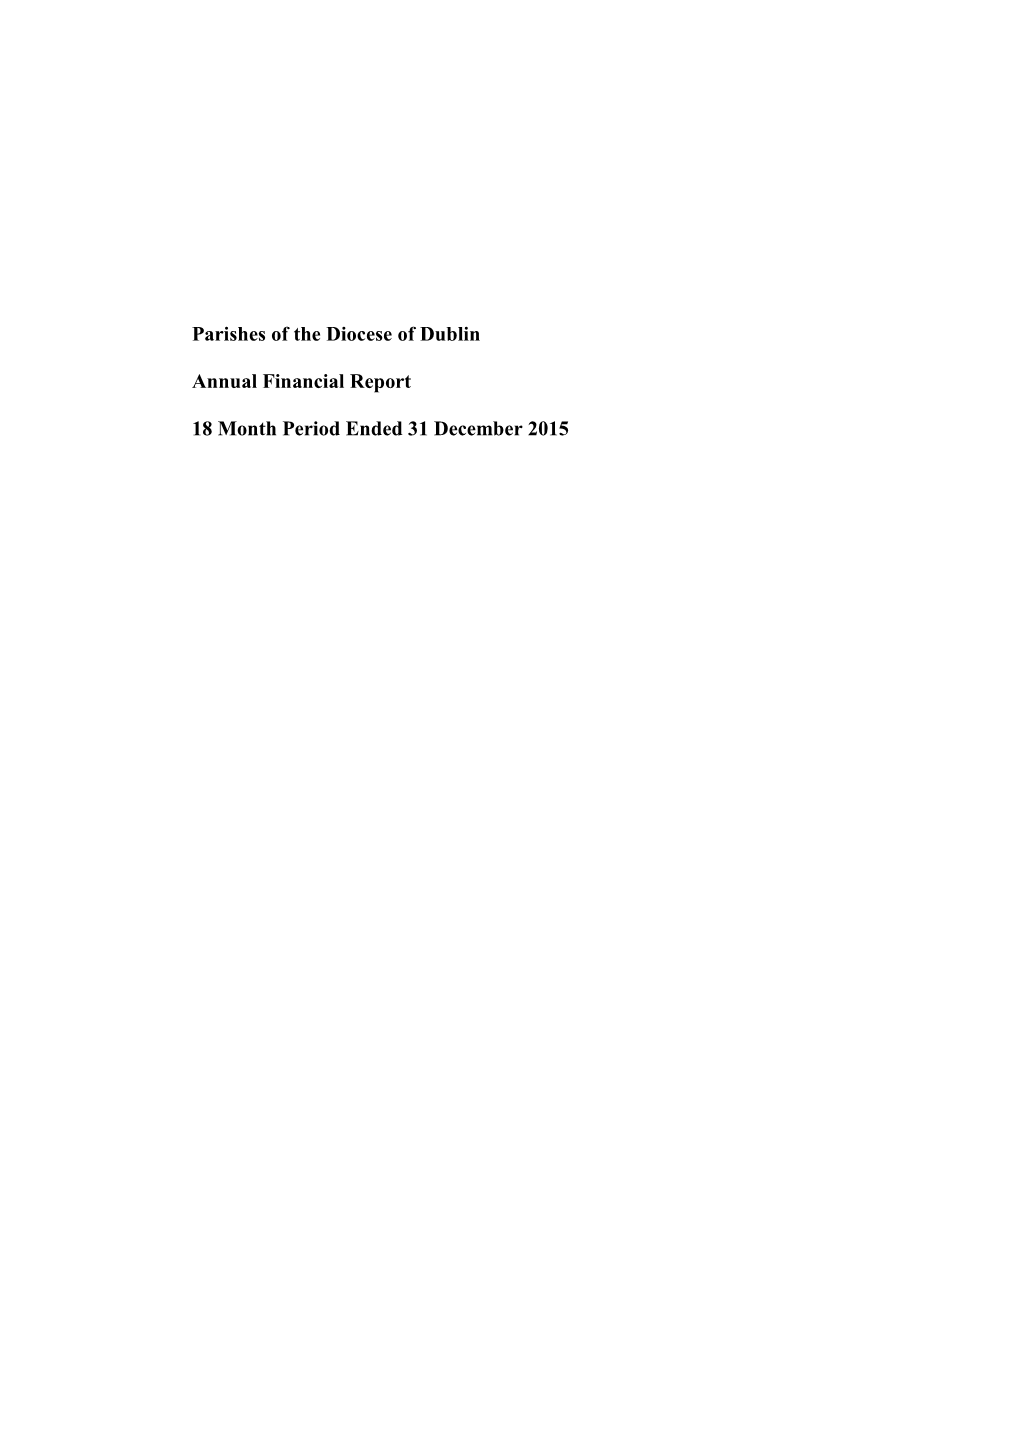 Parishes of the Diocese of Dublin Annual Financial Report 18 Month Period Ended 31 December 2015